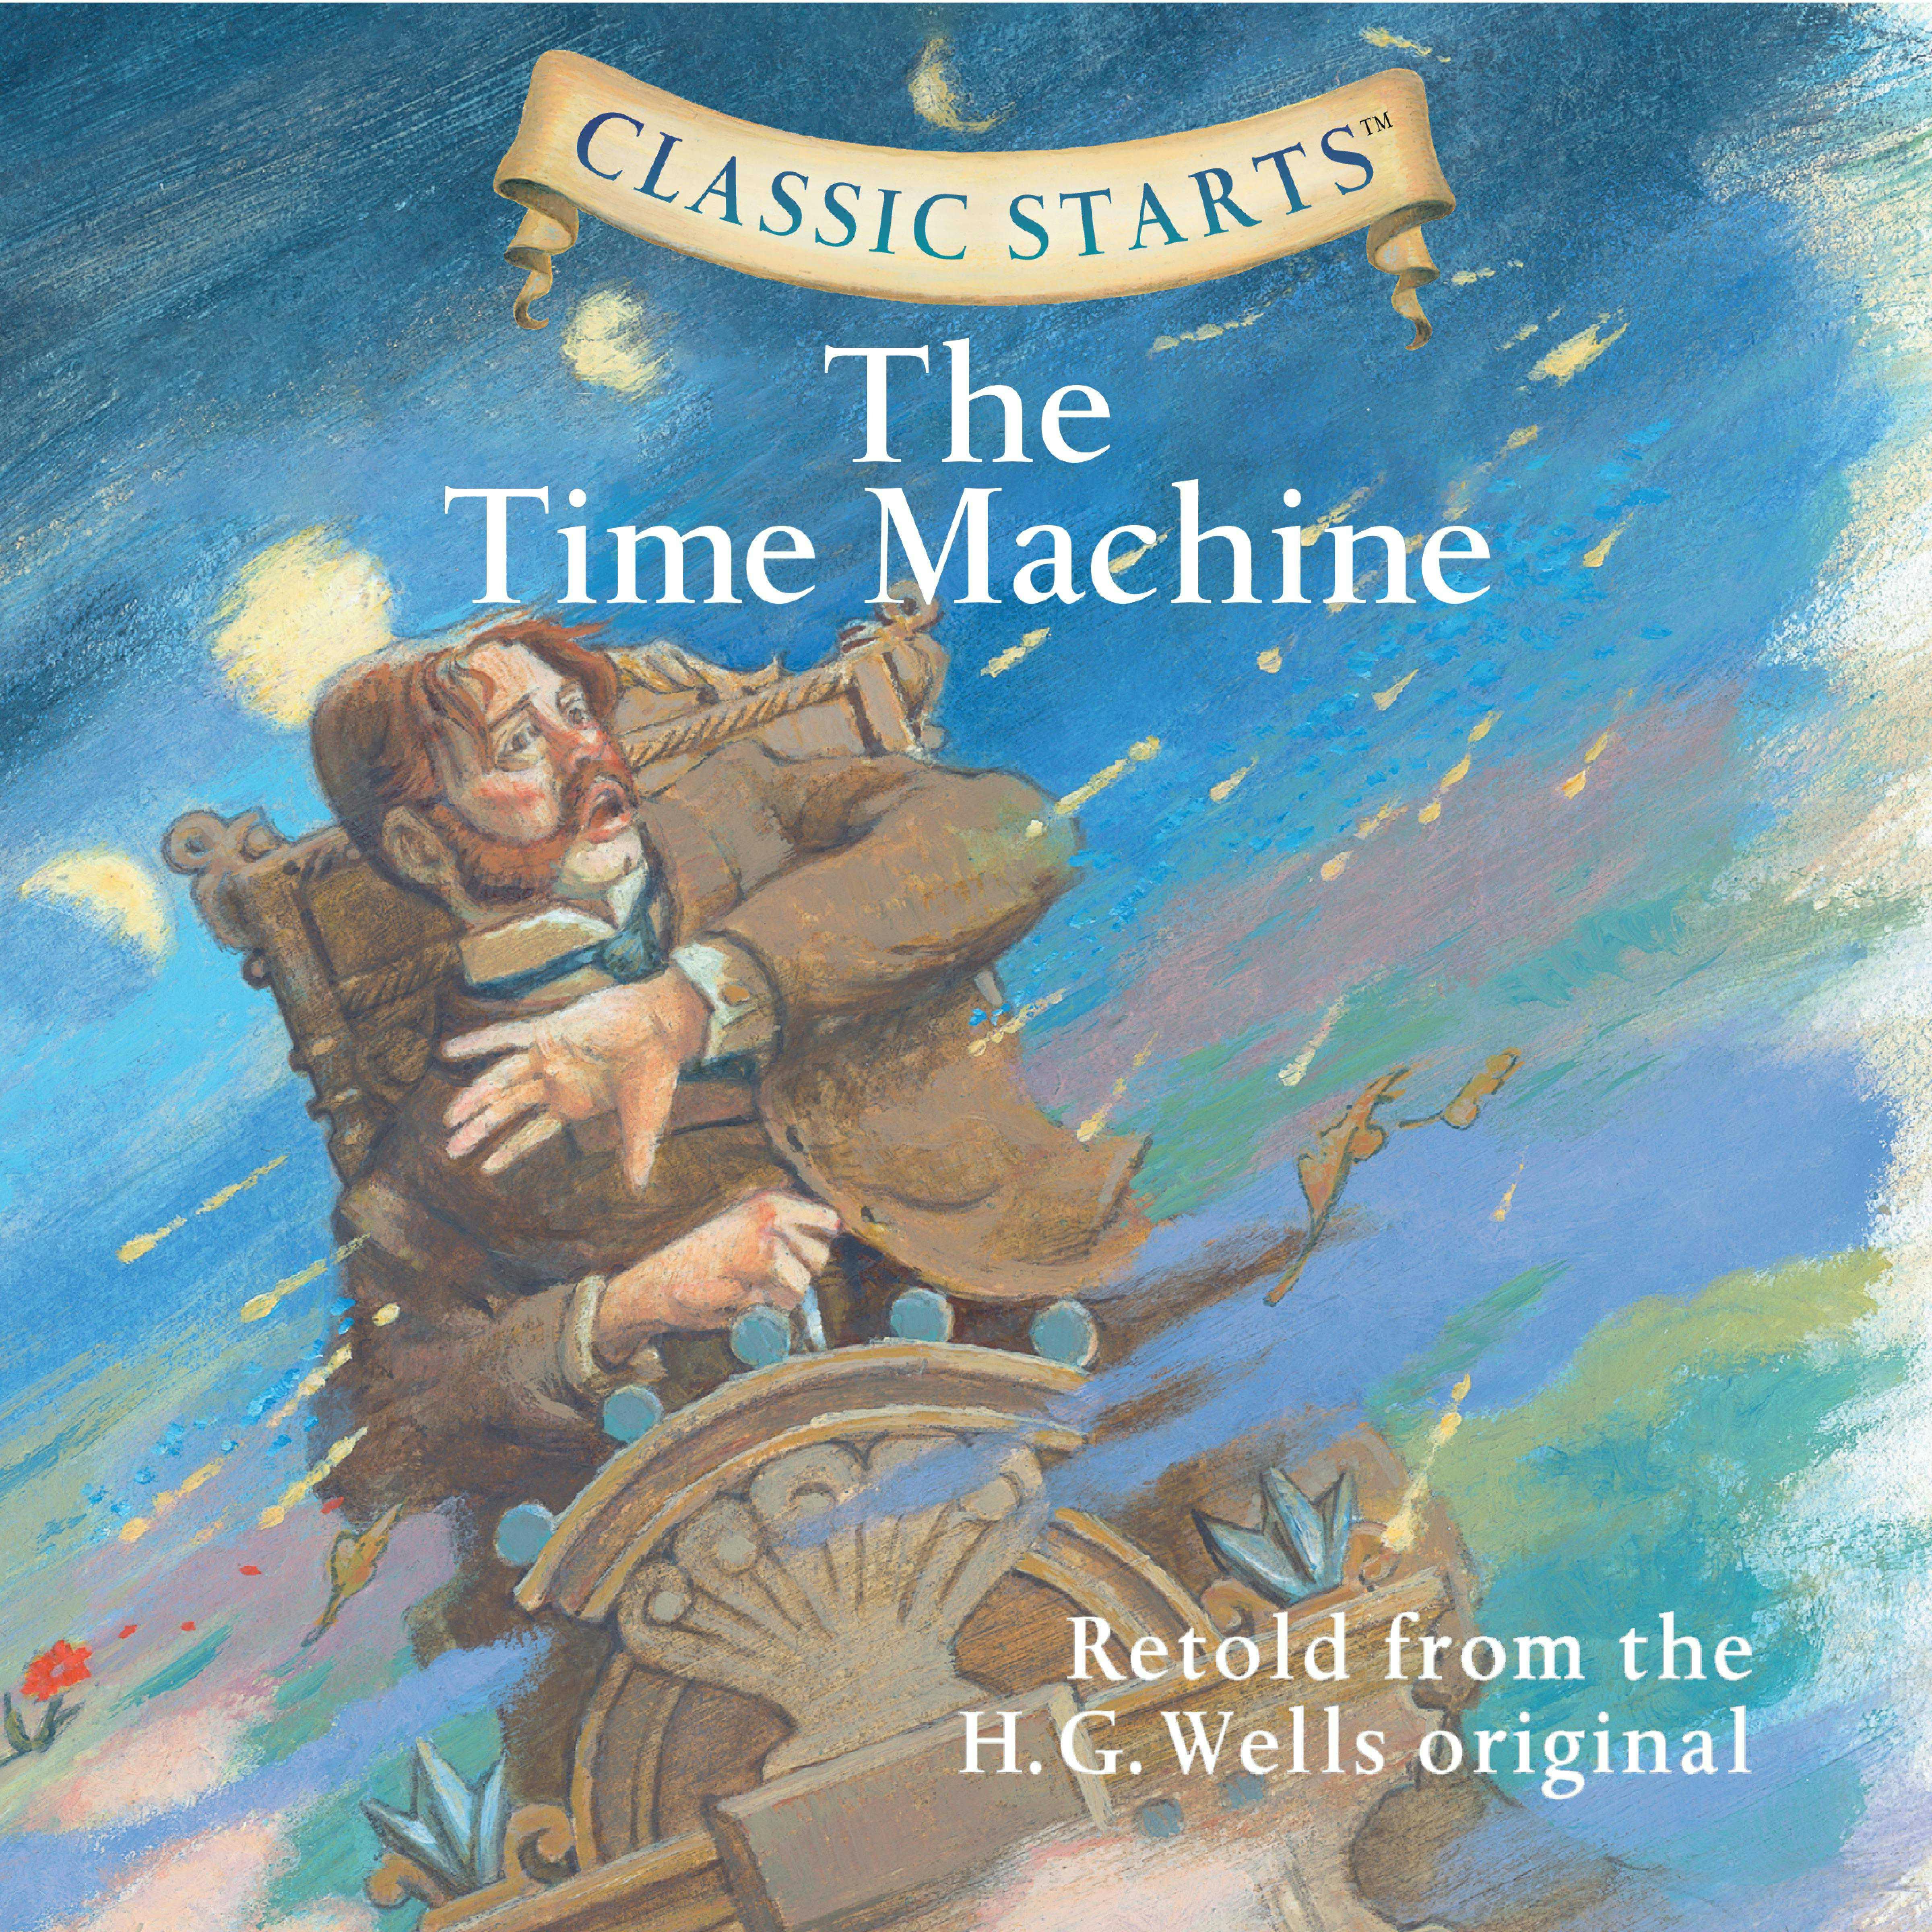 The Time Machine - undefined